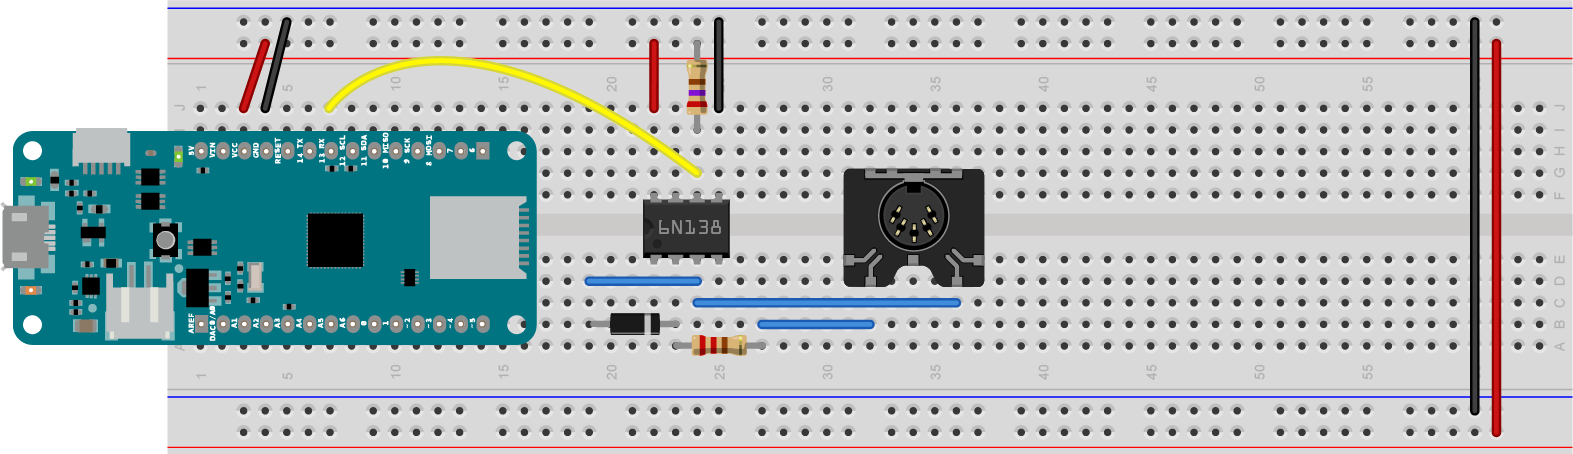 Figure 2. MIDI serial input connection to a 5-pin MIDI connector through an optoisolator.